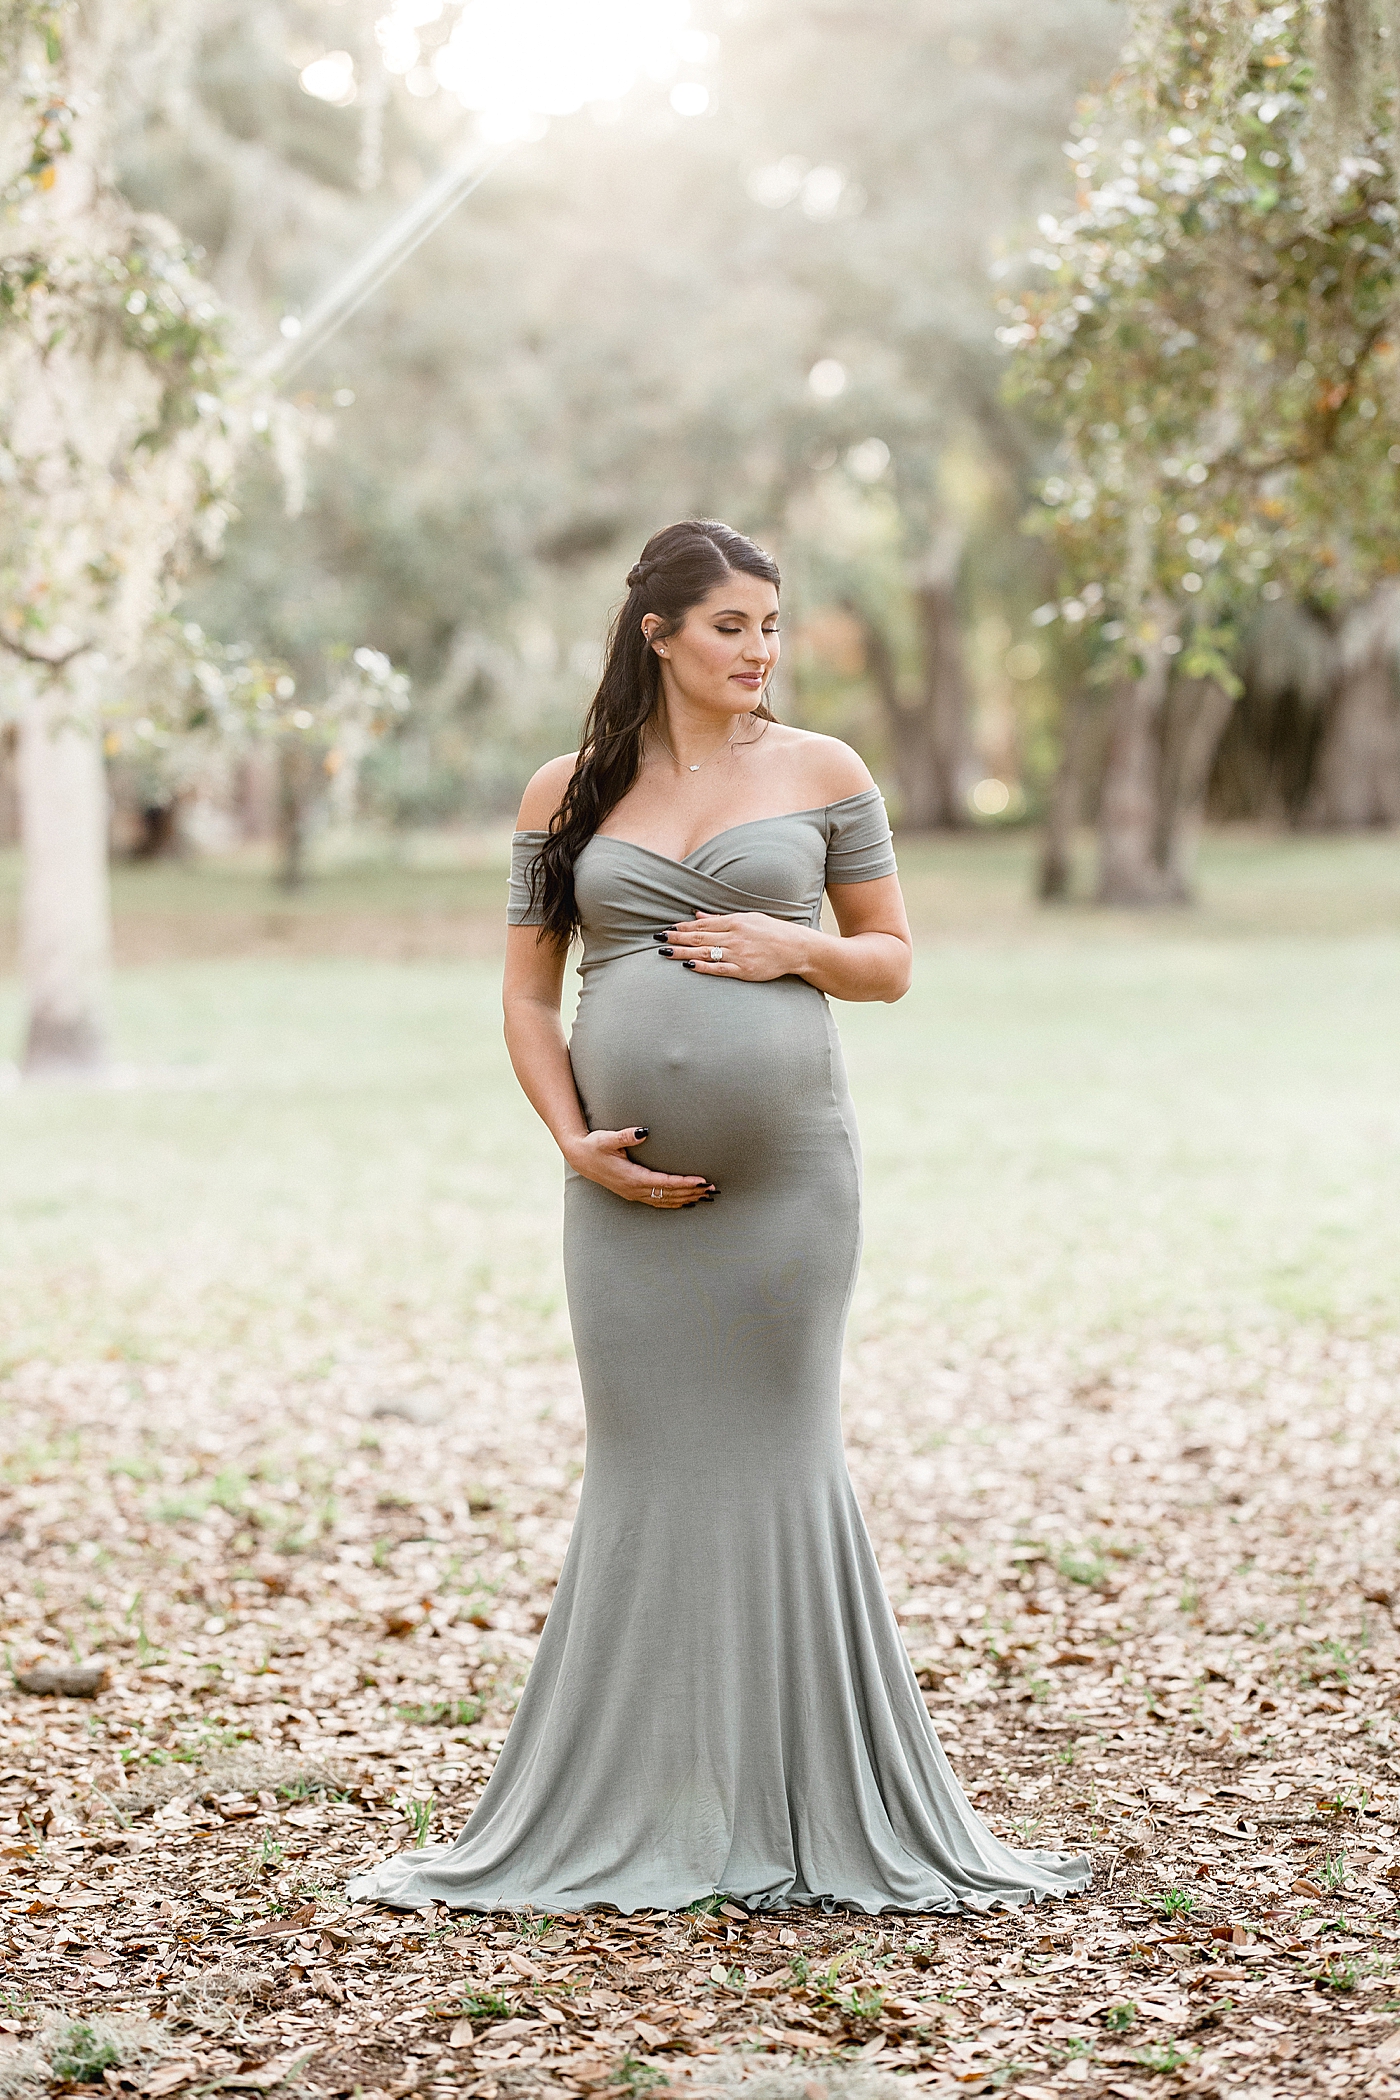 Sunset maternity session under the oaks in Tampa. Photo by Brittany Elise Photography.